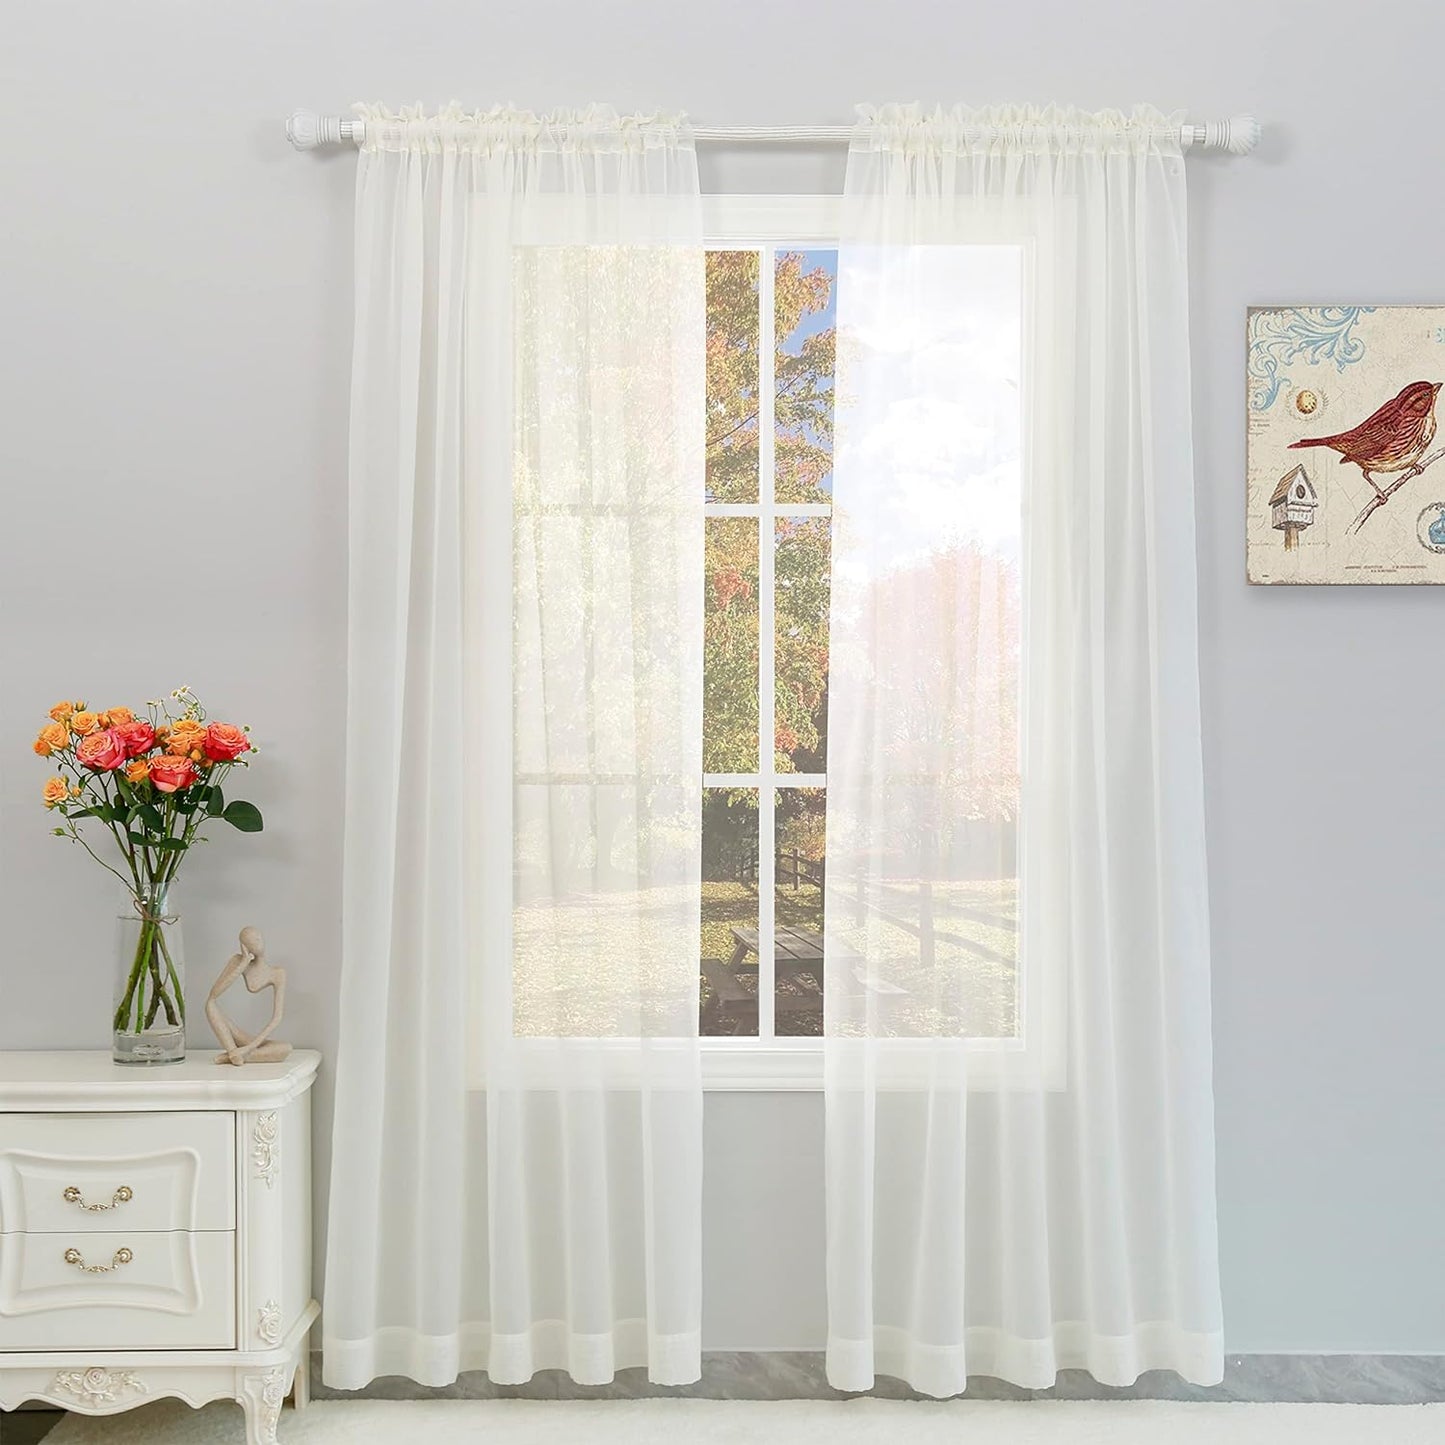 Dulcidee White Sheer Curtains 84 Inches Long 2 Panels Set - Lightweight and Light Filtering Elegant Rod Pocket Voile Window Sheer White Drapes for Bedroom/Living Room,2Pcs  DULCIDEE Ivory 59W X 84L | 2 Panels 